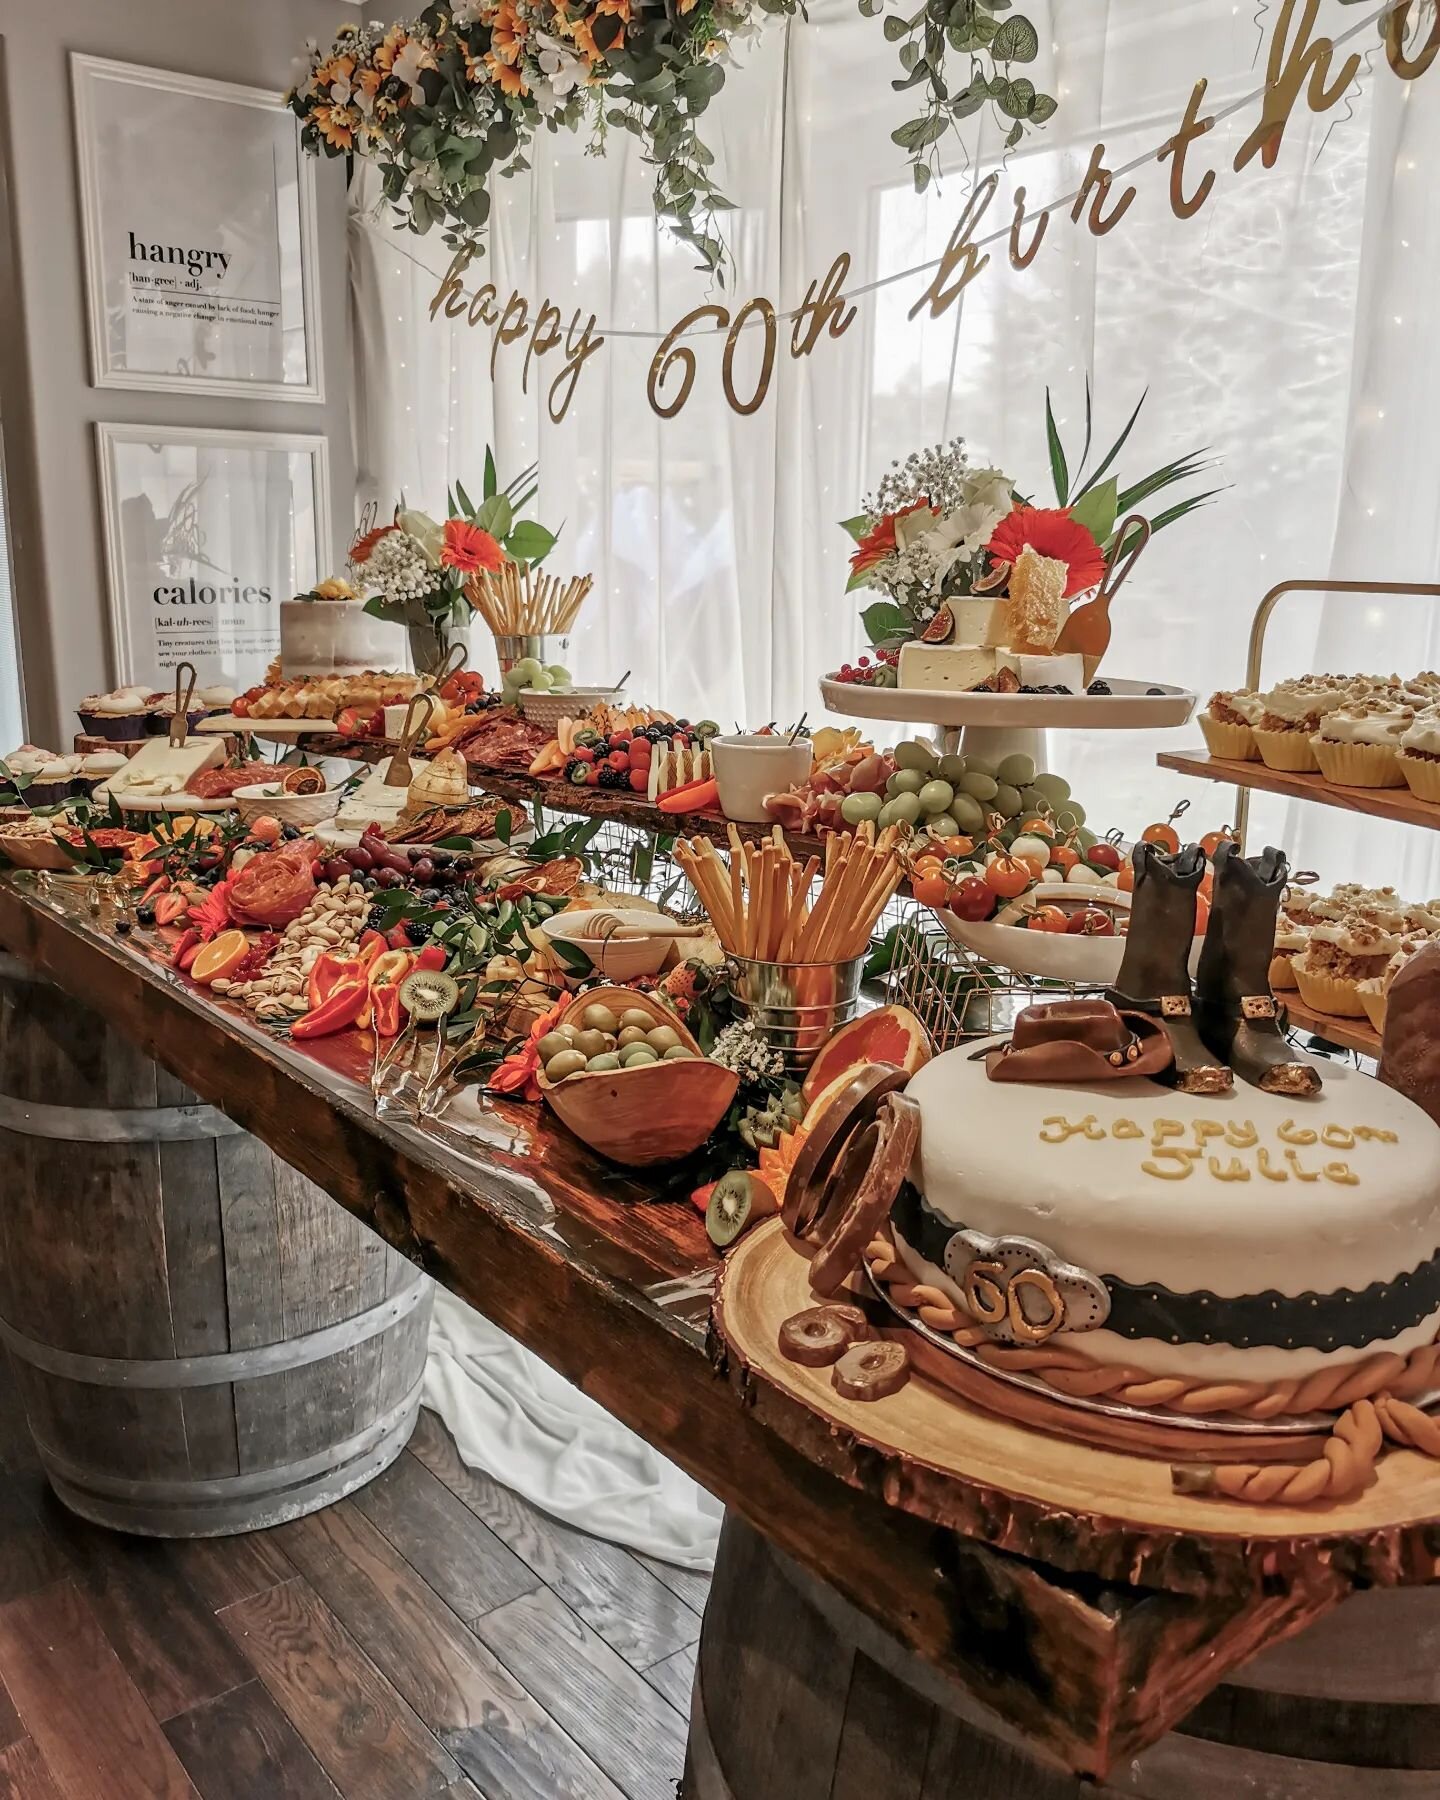 A beautiful graze to celebrate a 60th birthday! 

Her daughter did an incredible job decorating and planning, we were so grateful to be a part of the celebration. 

#justgraze #justgrazegrimsby #grazingtable #charcuterietable #foodstyling #justaddwin